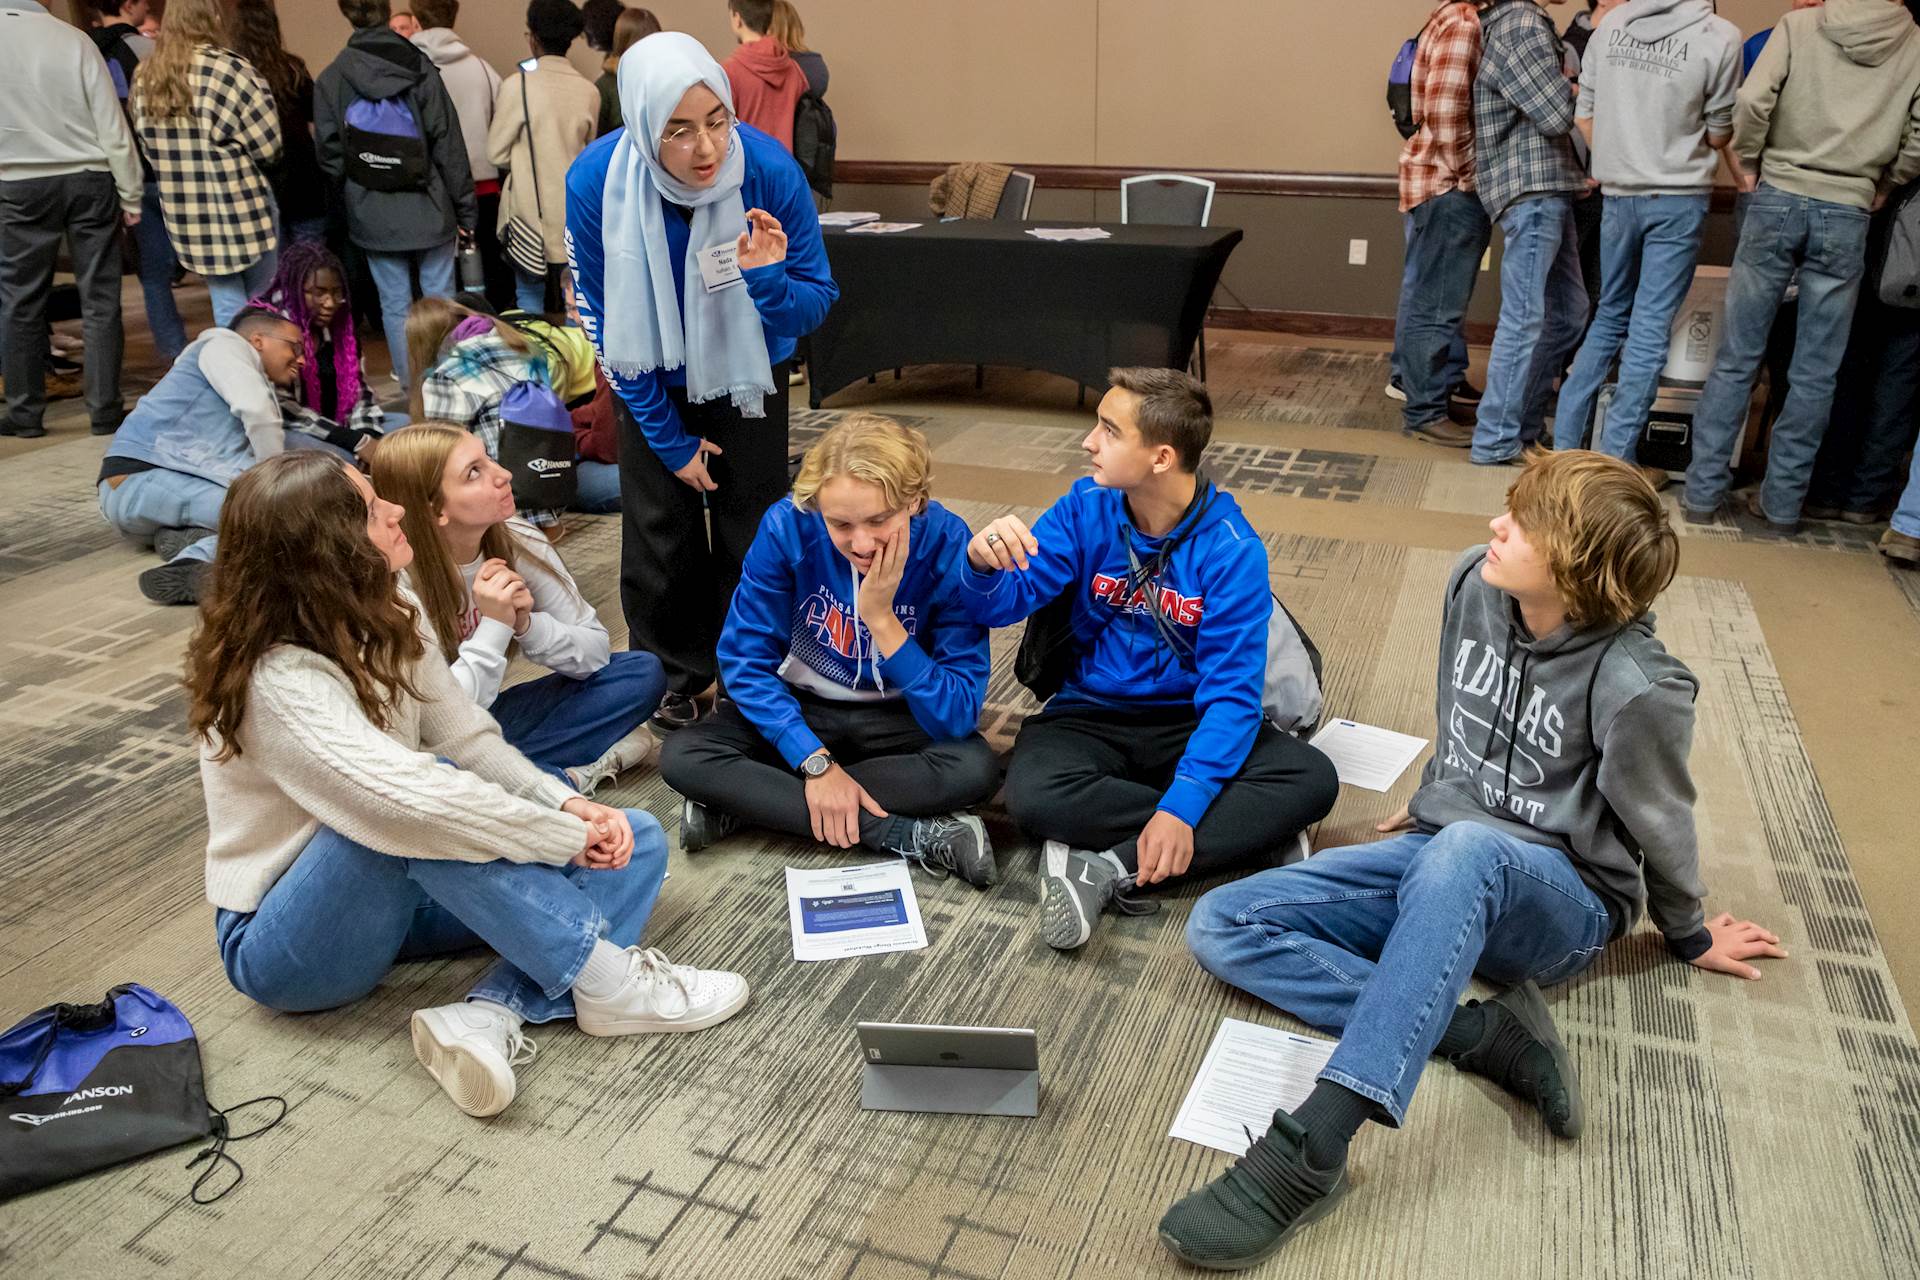 Hanson employee speaks to five students sitting on the floor of a conference room with beige, patterned carpet